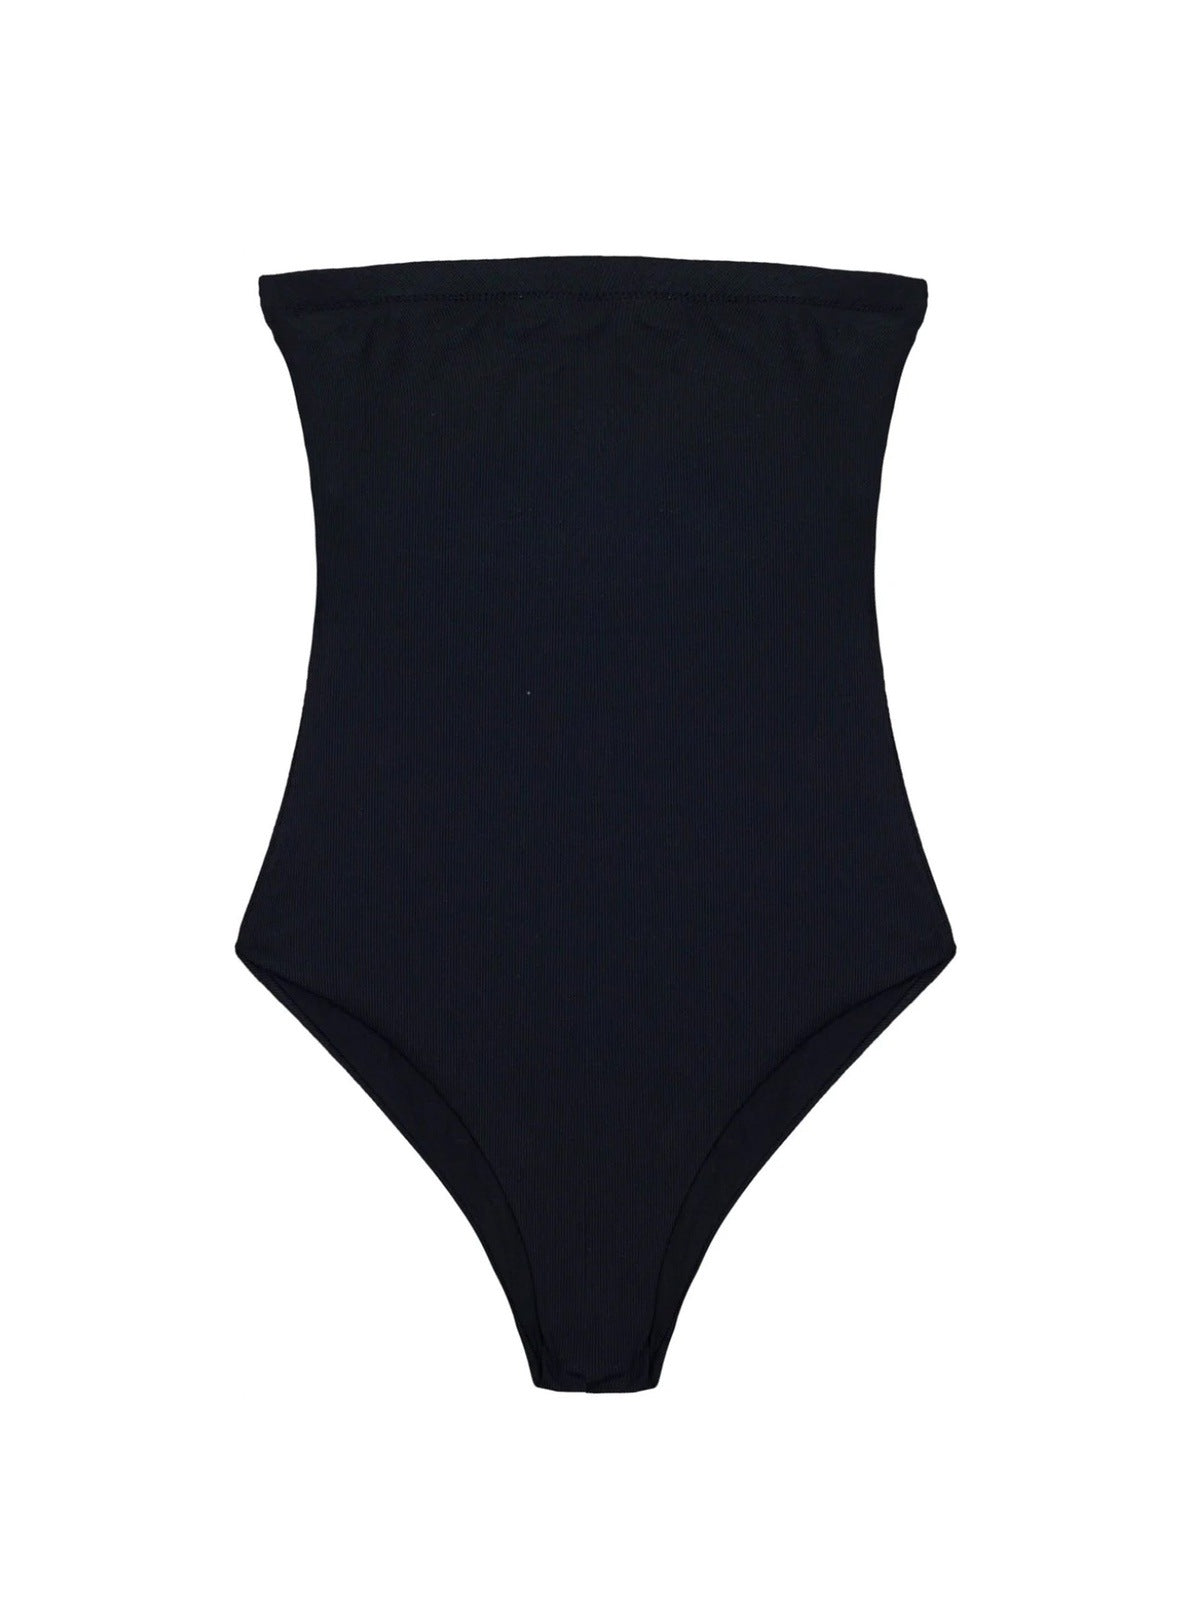 Camille bandeau swimsuit in Black